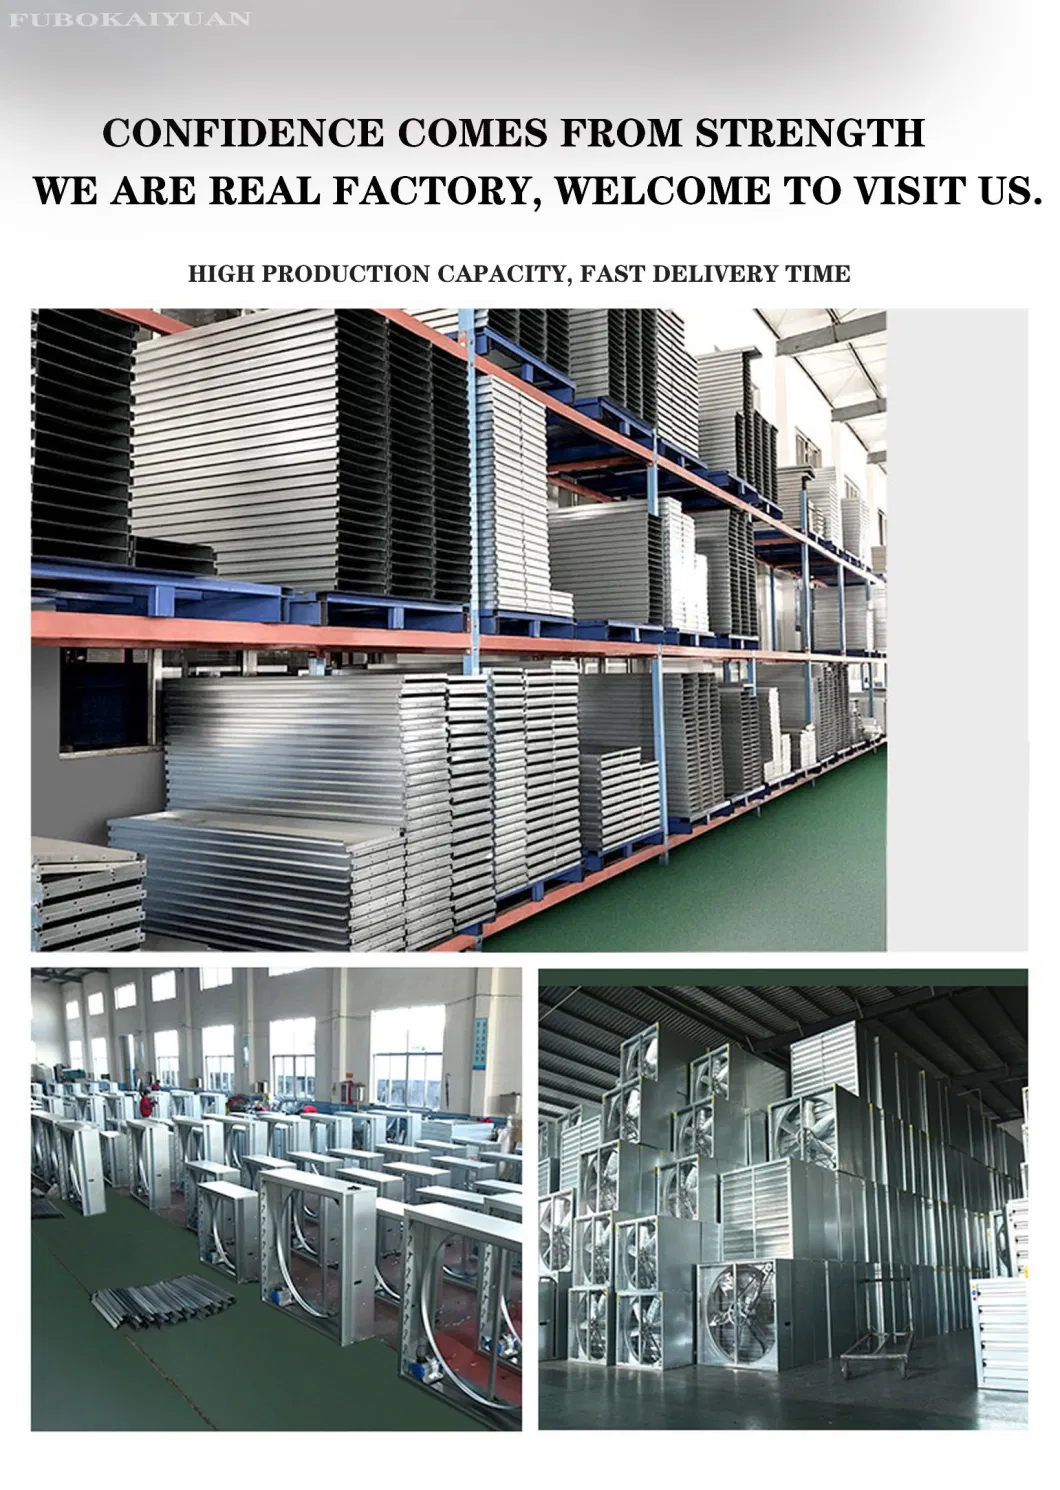 High Quality with Competitive Price Poulty Equipment Hanging Blower/Ventilation Exhaust Fan for Cow-House/Industrial/Greenhouse/Chicken House/Pig Farm